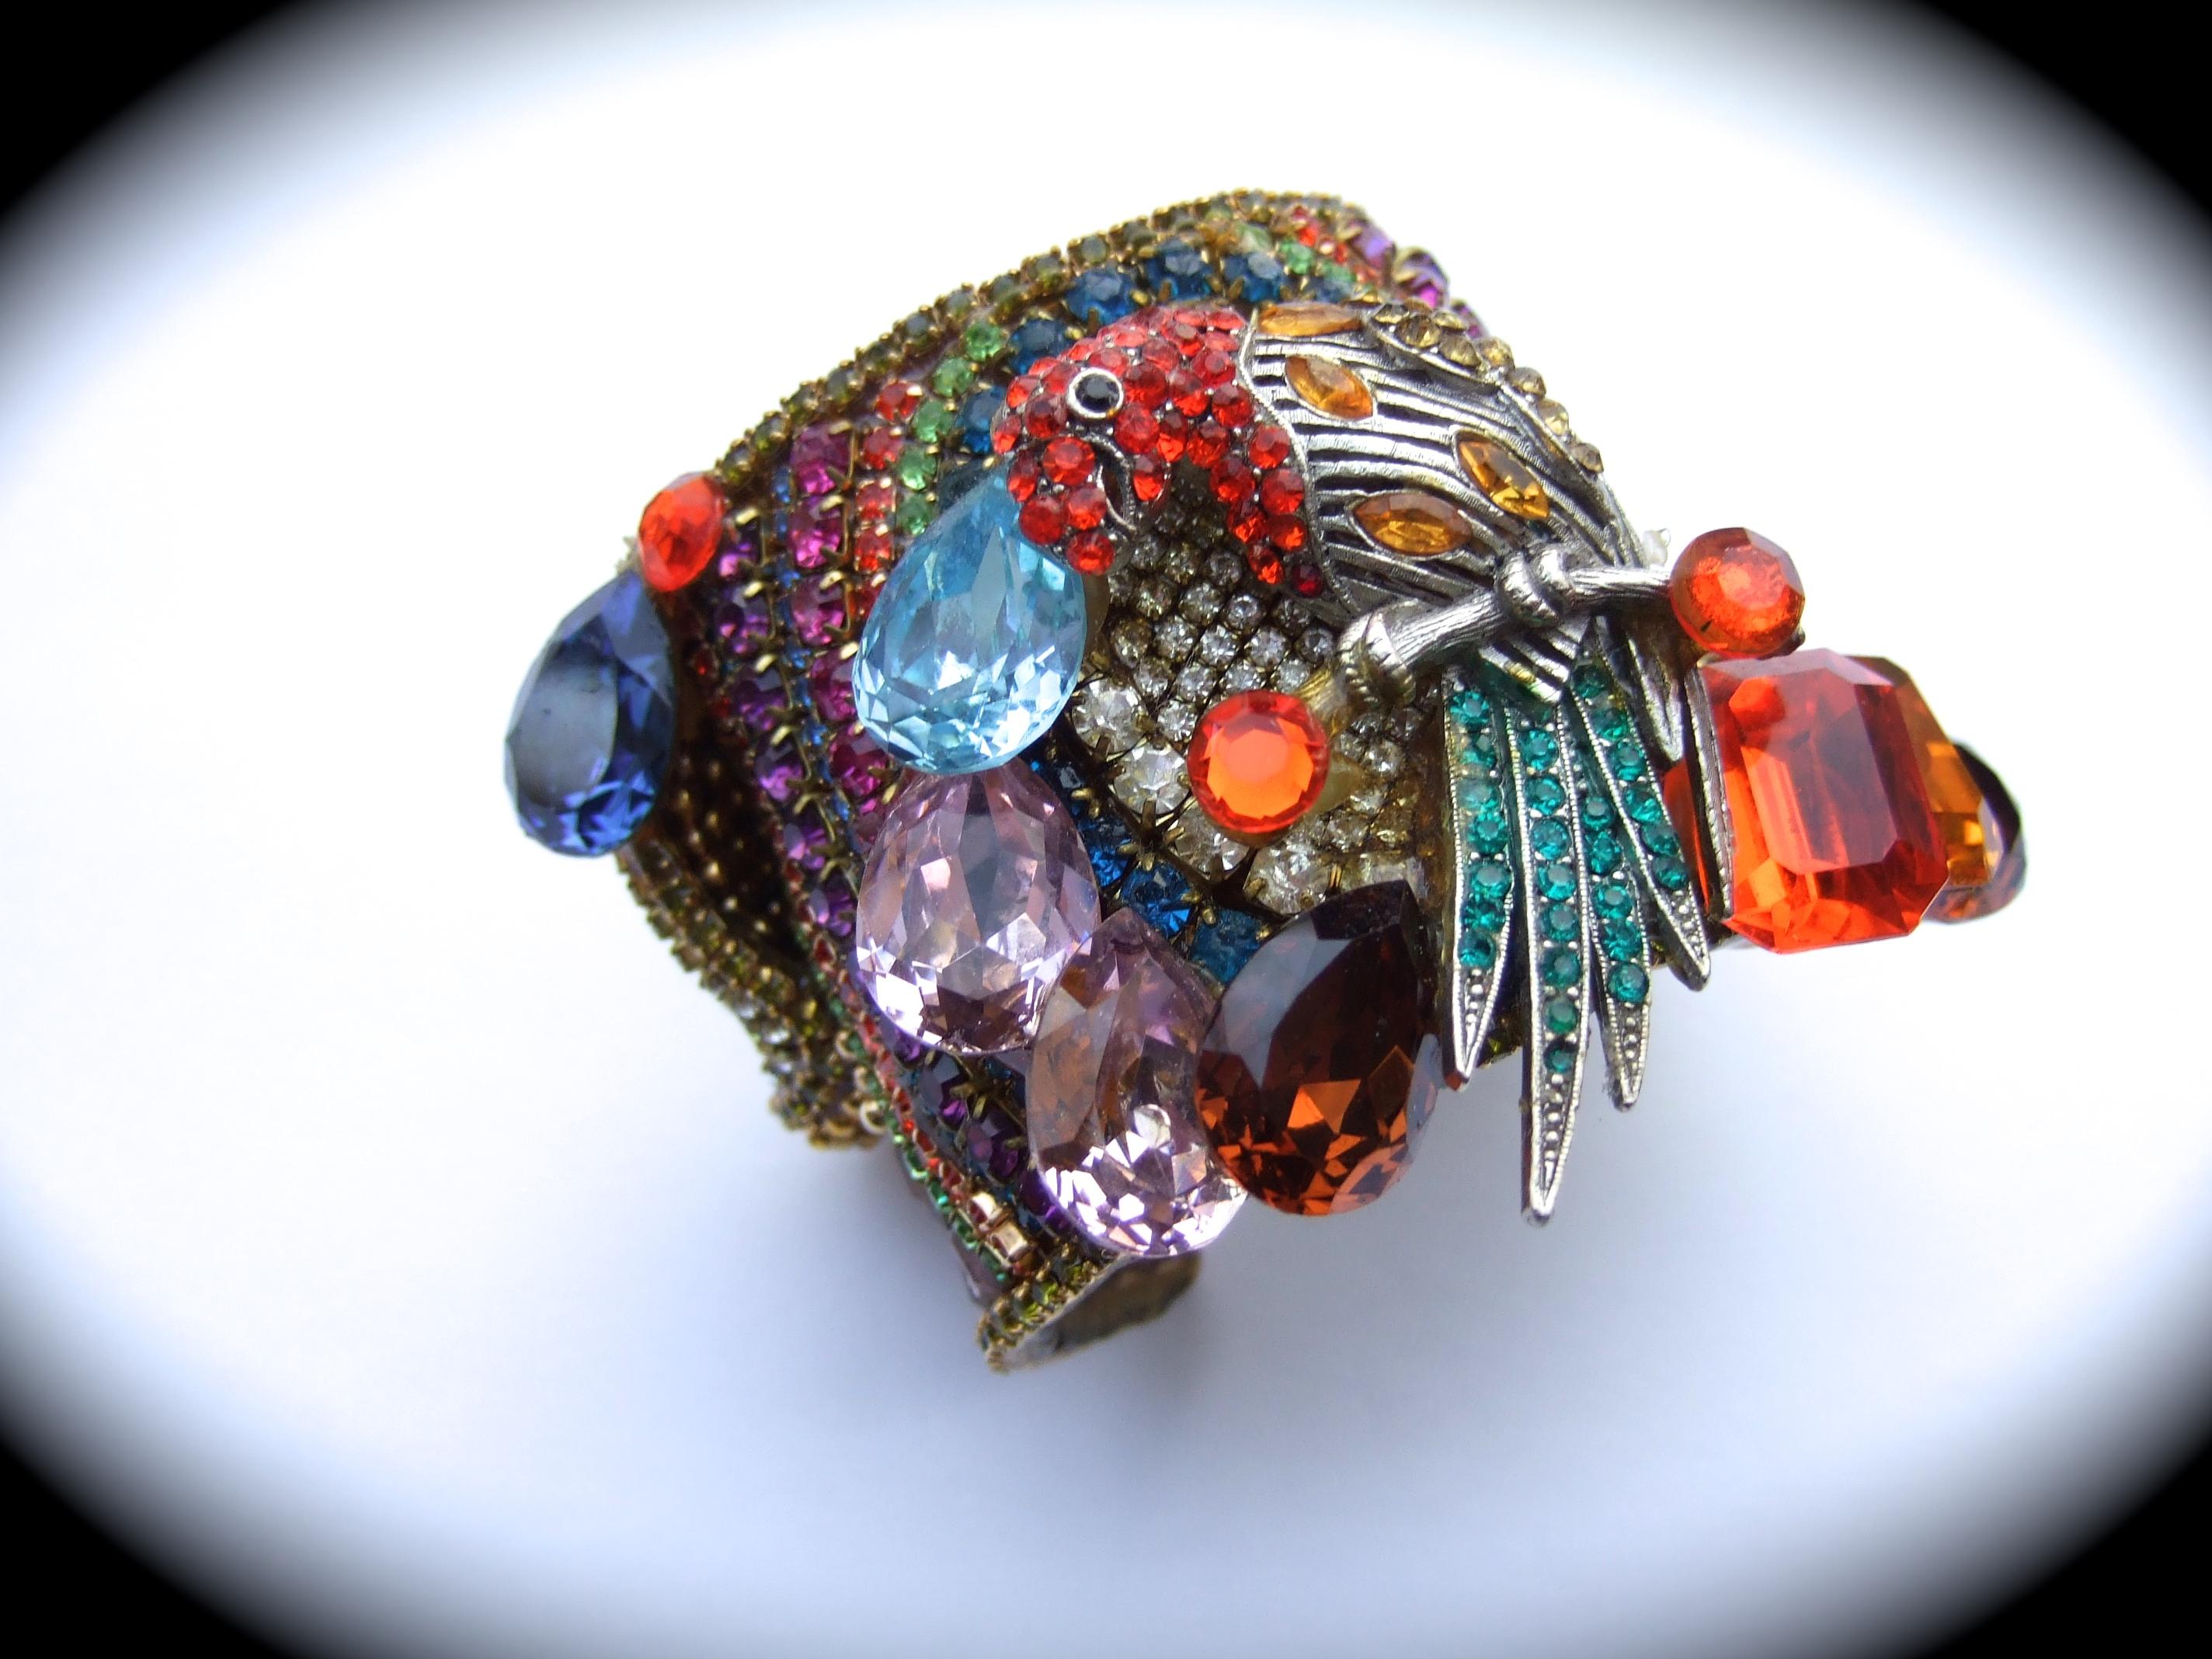 Wendy Gell Massive crystal encrusted parrot design artisan cuff bracelet c 1980s
The bold large-scale heavy brass metal cuff is embellished with a myriad of glittering 
crystals in various colors & sizes 

The jeweled parrot is perched upon a silver